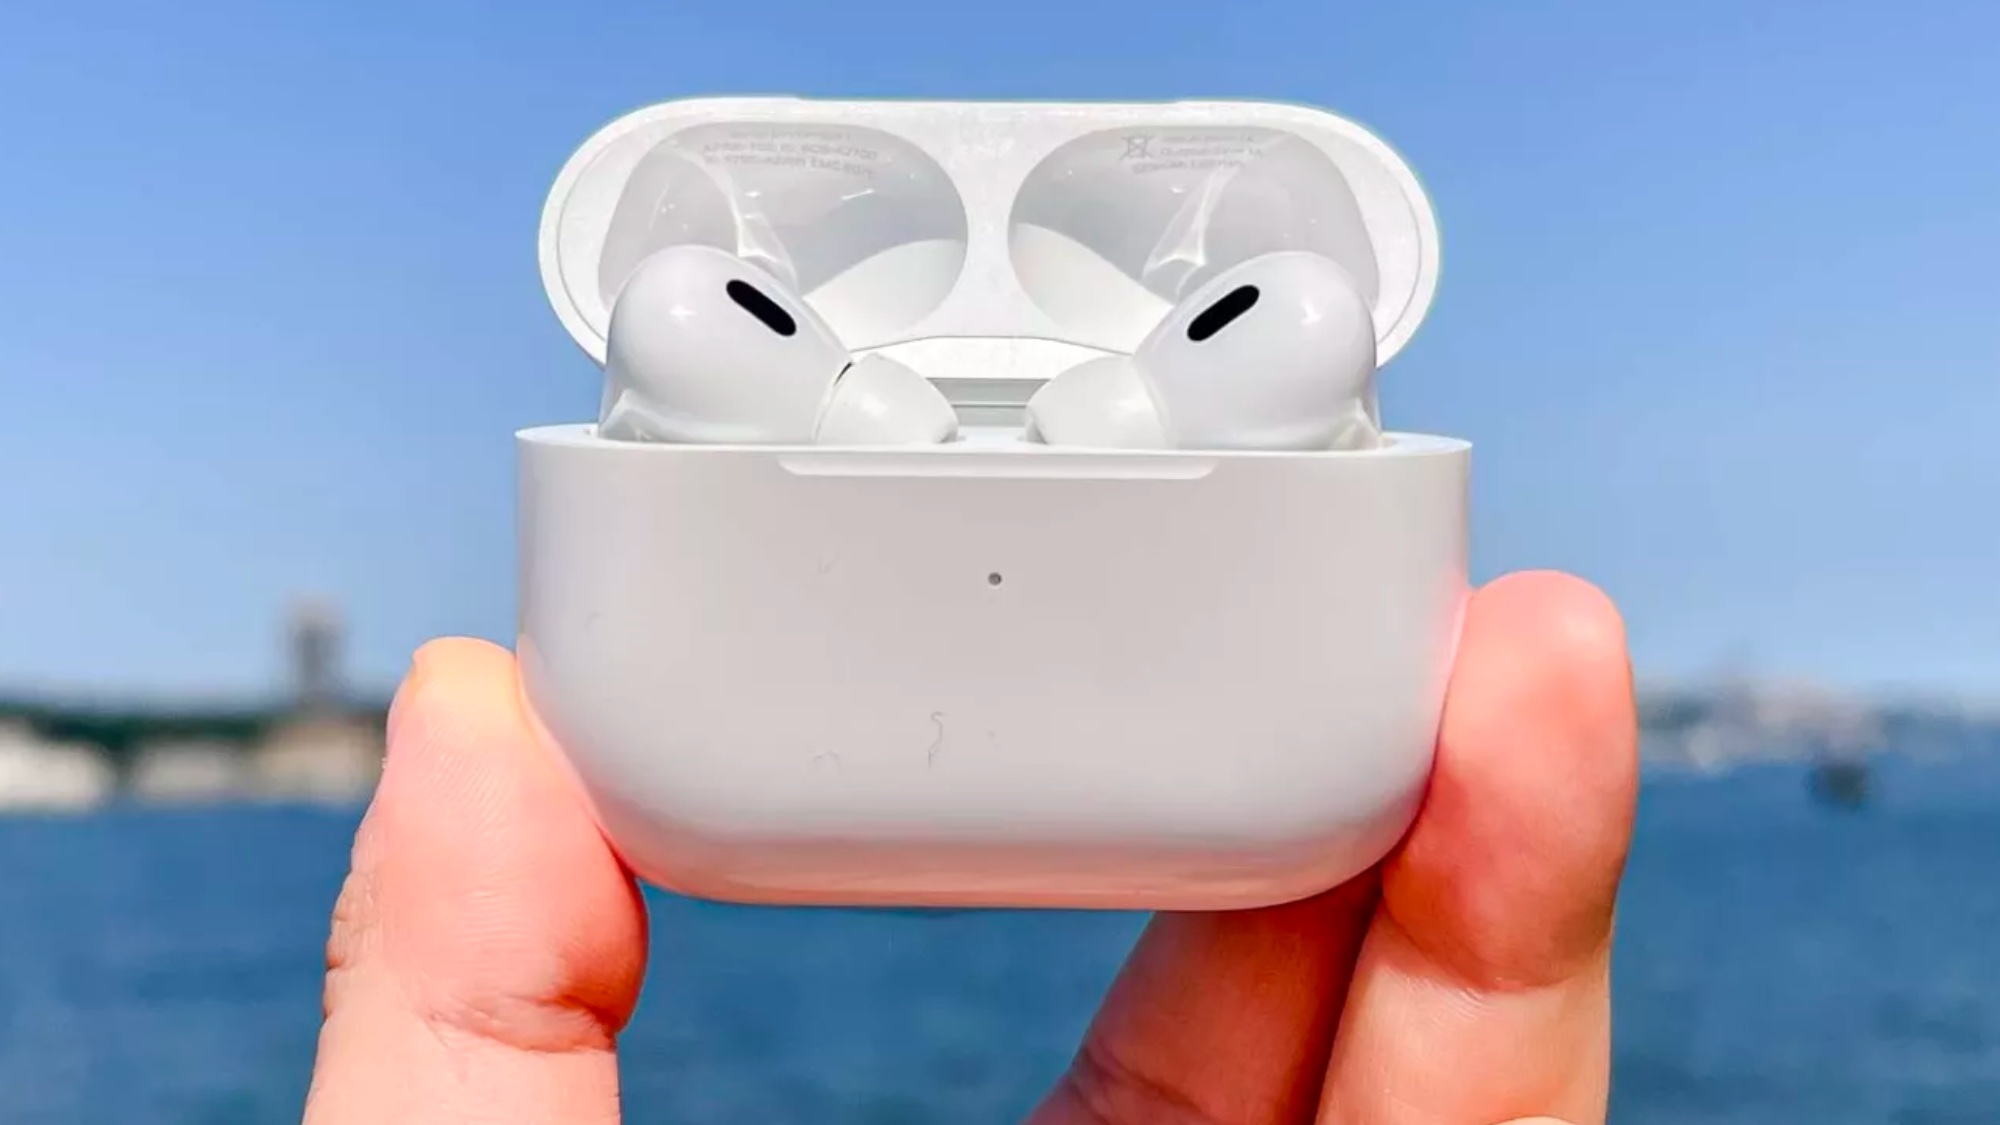 Breaking News: Apple's Next Big Thing - AirPods Pro with a Hearing Aid Feature Everyone's Talking About